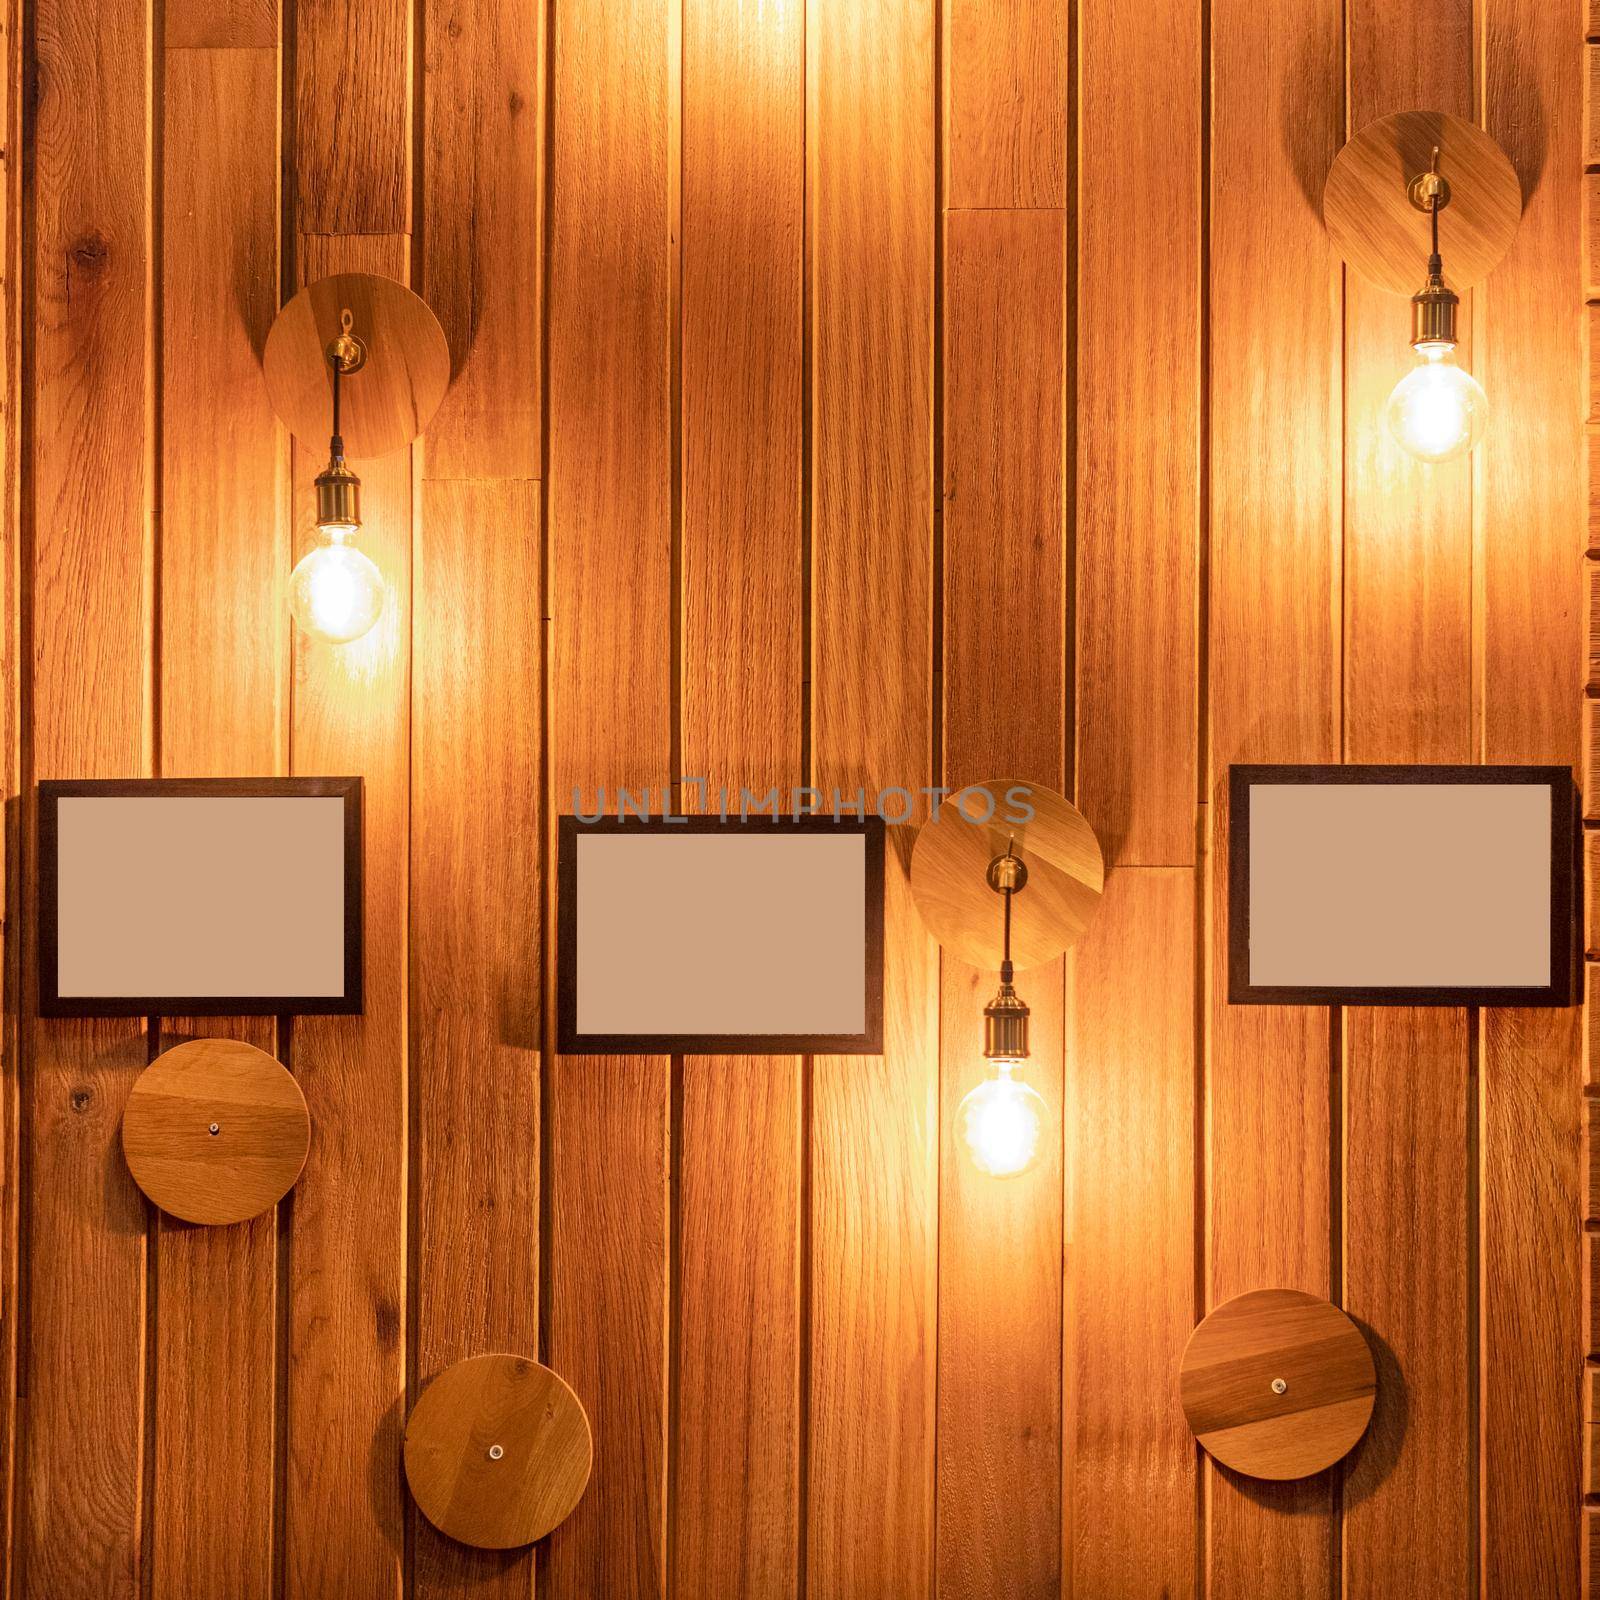 Restaurant, pub interior with photo frames, wooden wall